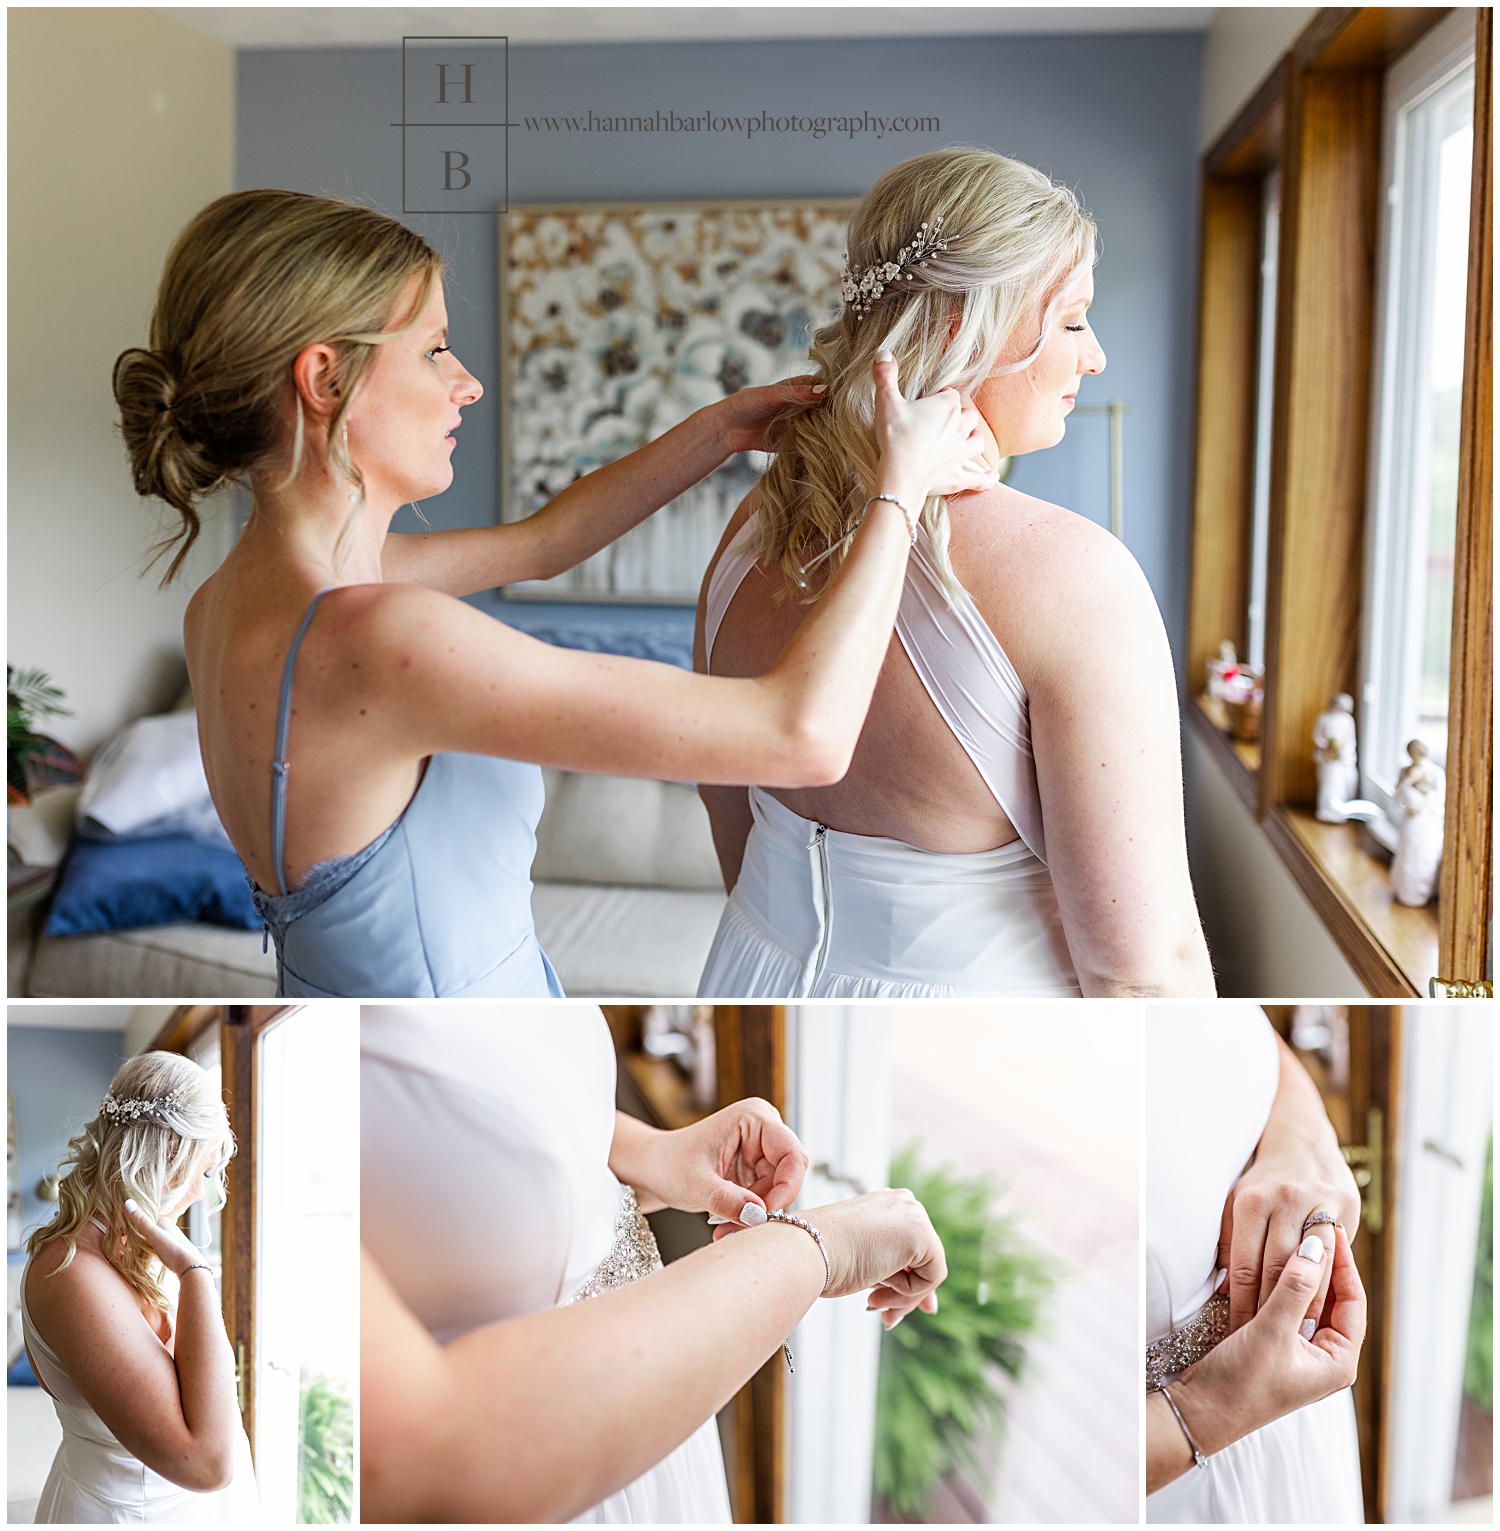 Twin sister helping bride get ready